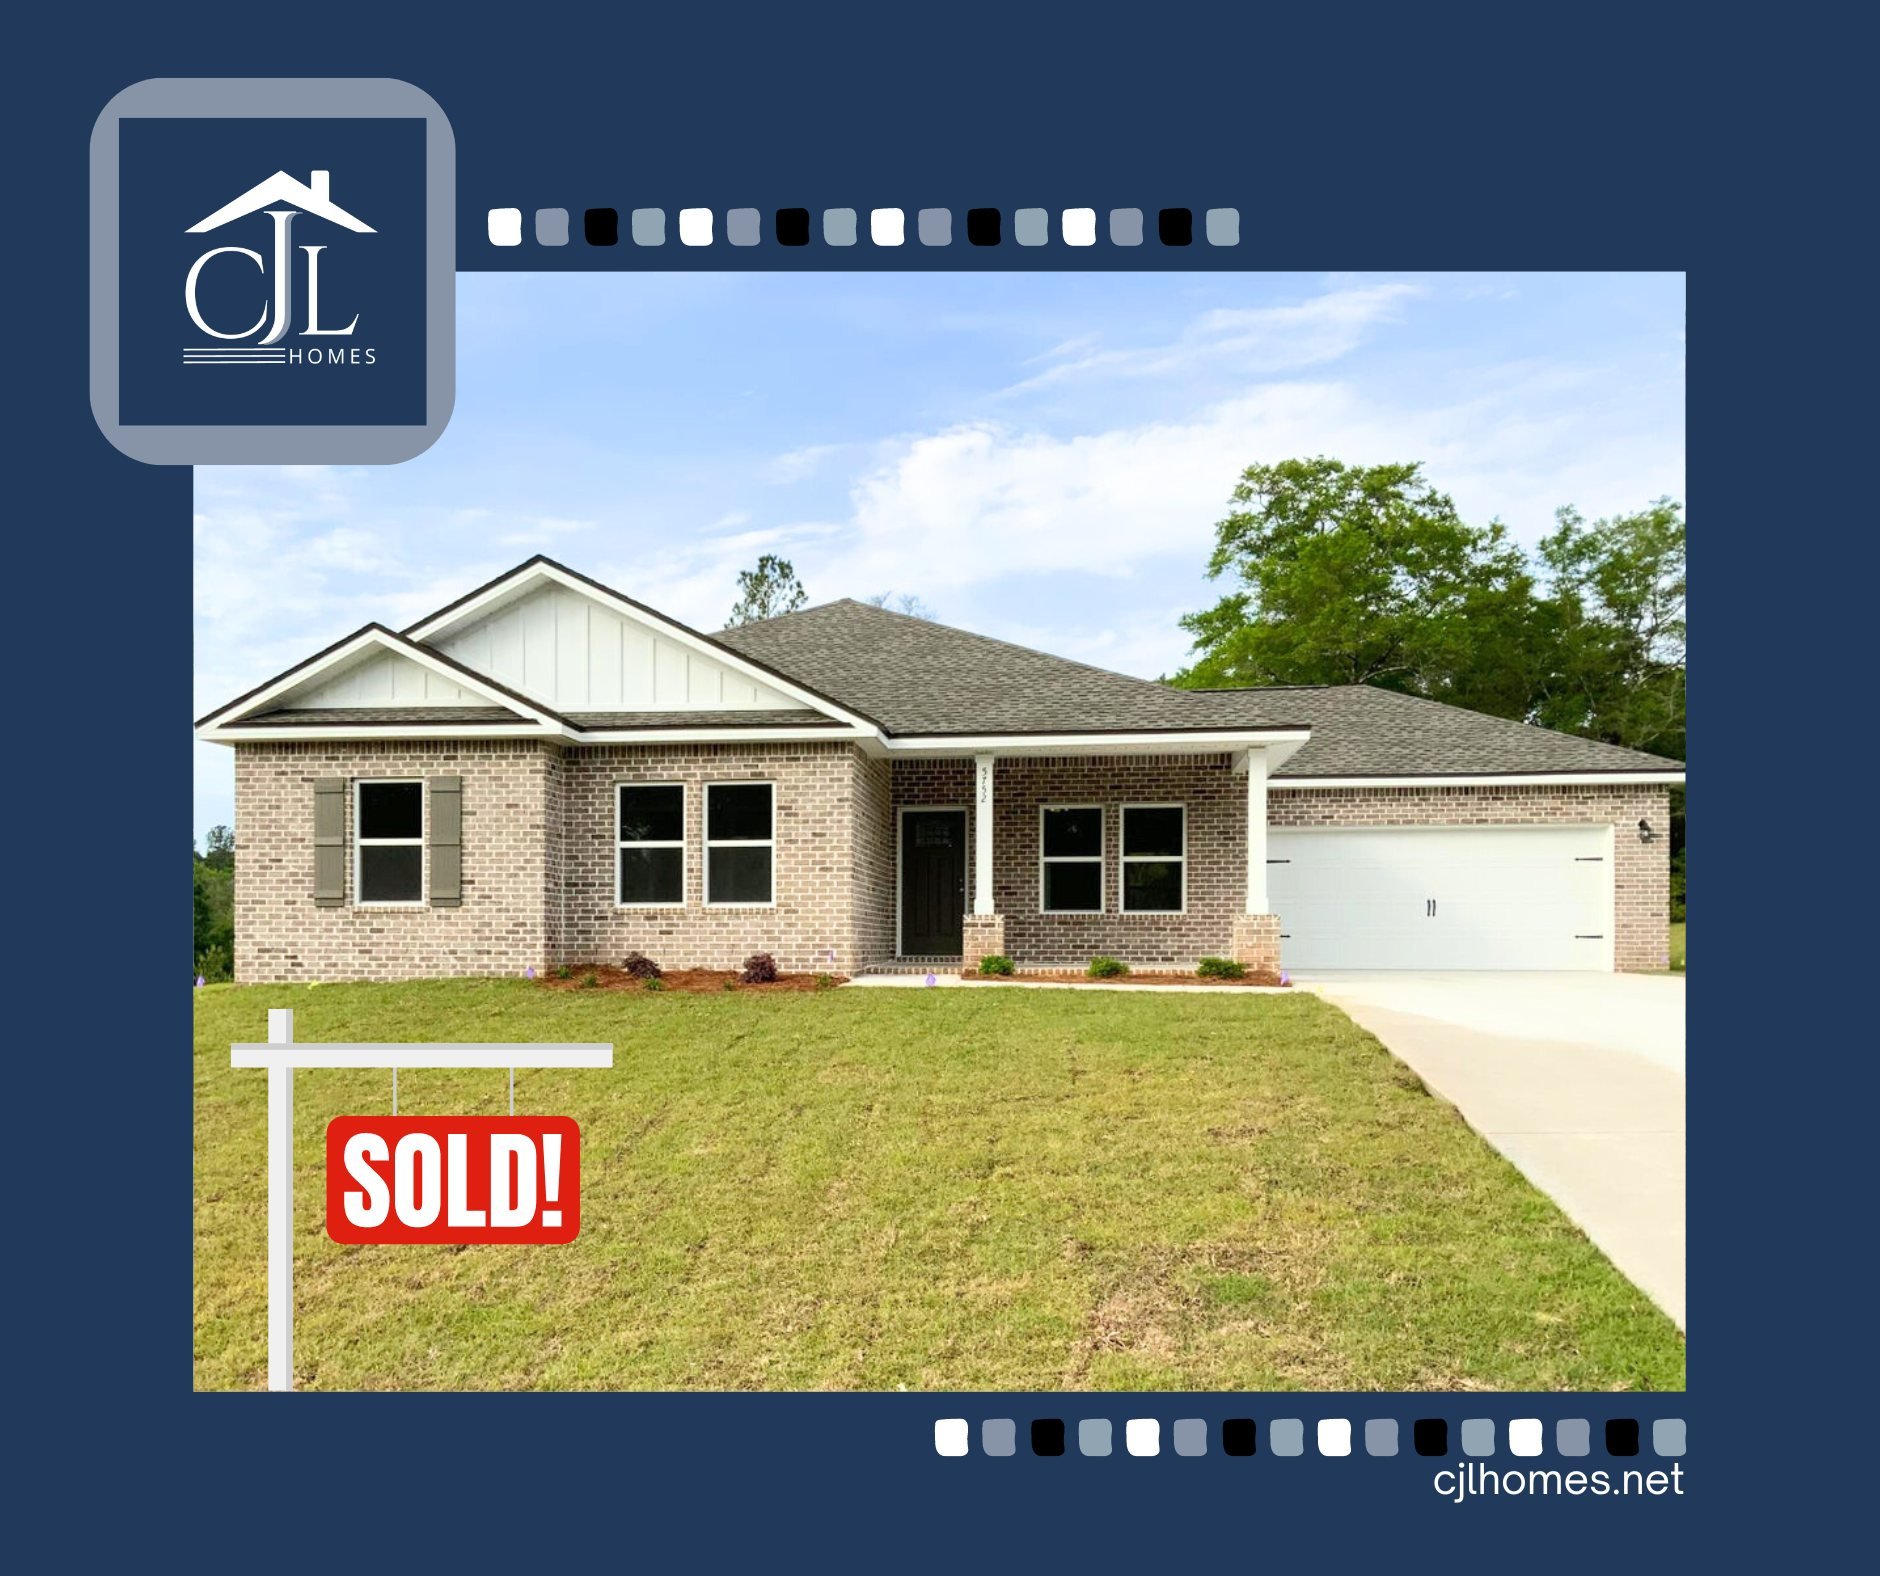 🏡 **SOLD!** 🎉

🌟 Residential Detached Single Family - **SOLD**
💰 Price: $302,000
📍 Address: 5752 Wayne Rogers Road, Crestview, FL 32539

🛏️ 4 Beds | 🛁 2 Baths | 🏡 Craftsman Style | 📐 1 Story | 🏗️ Year Built: 2024

Another home finds its hap